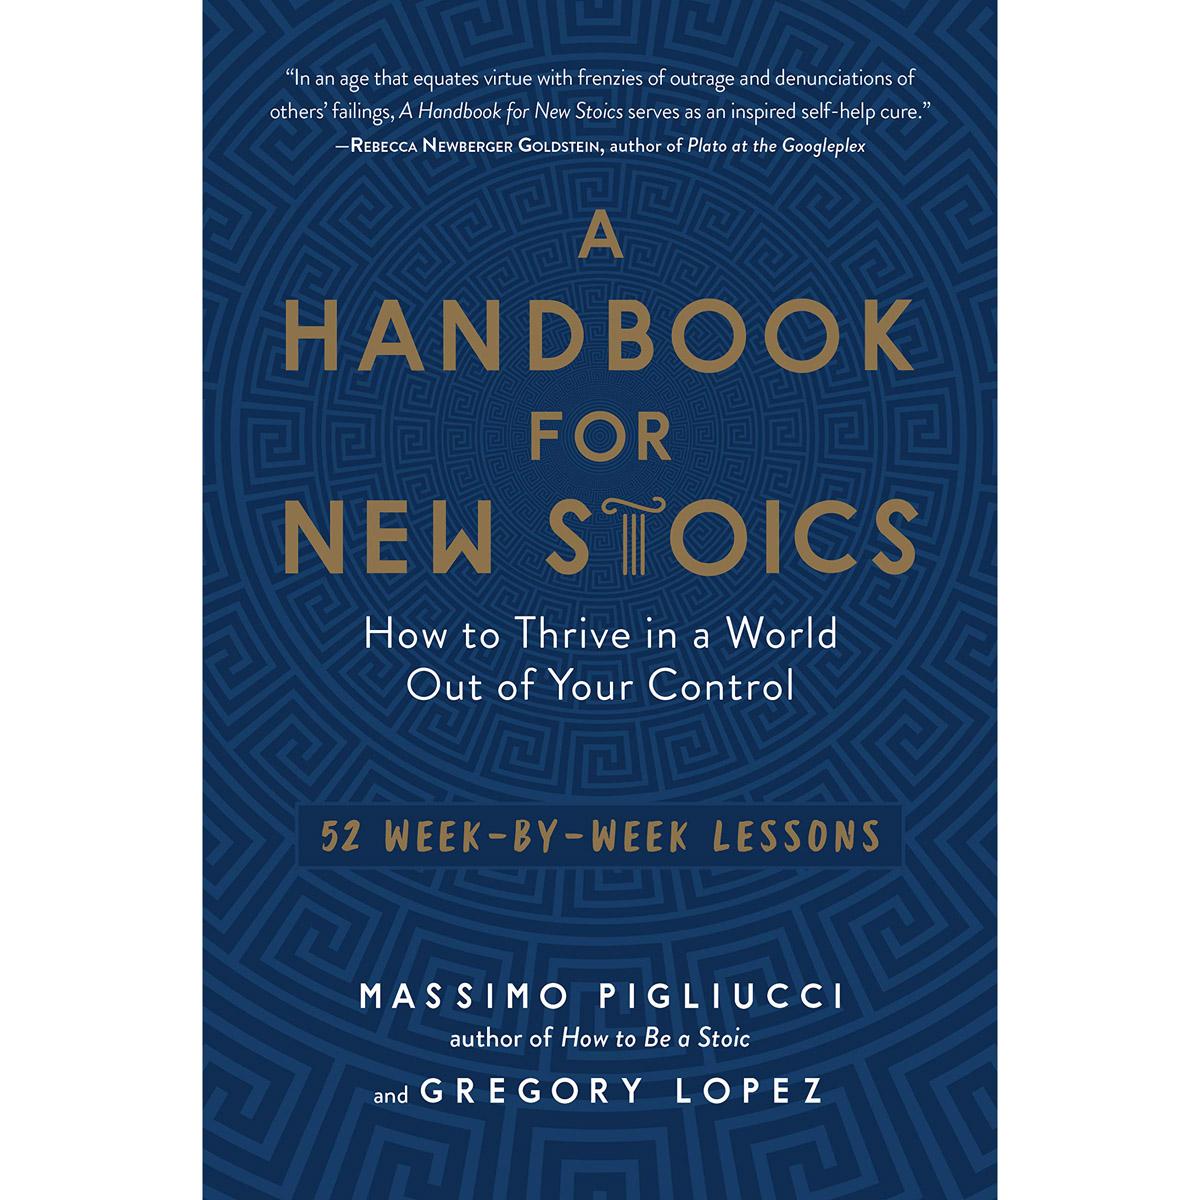 A Handbook for New Stoics How to Thrive in a World eBook for $2.99